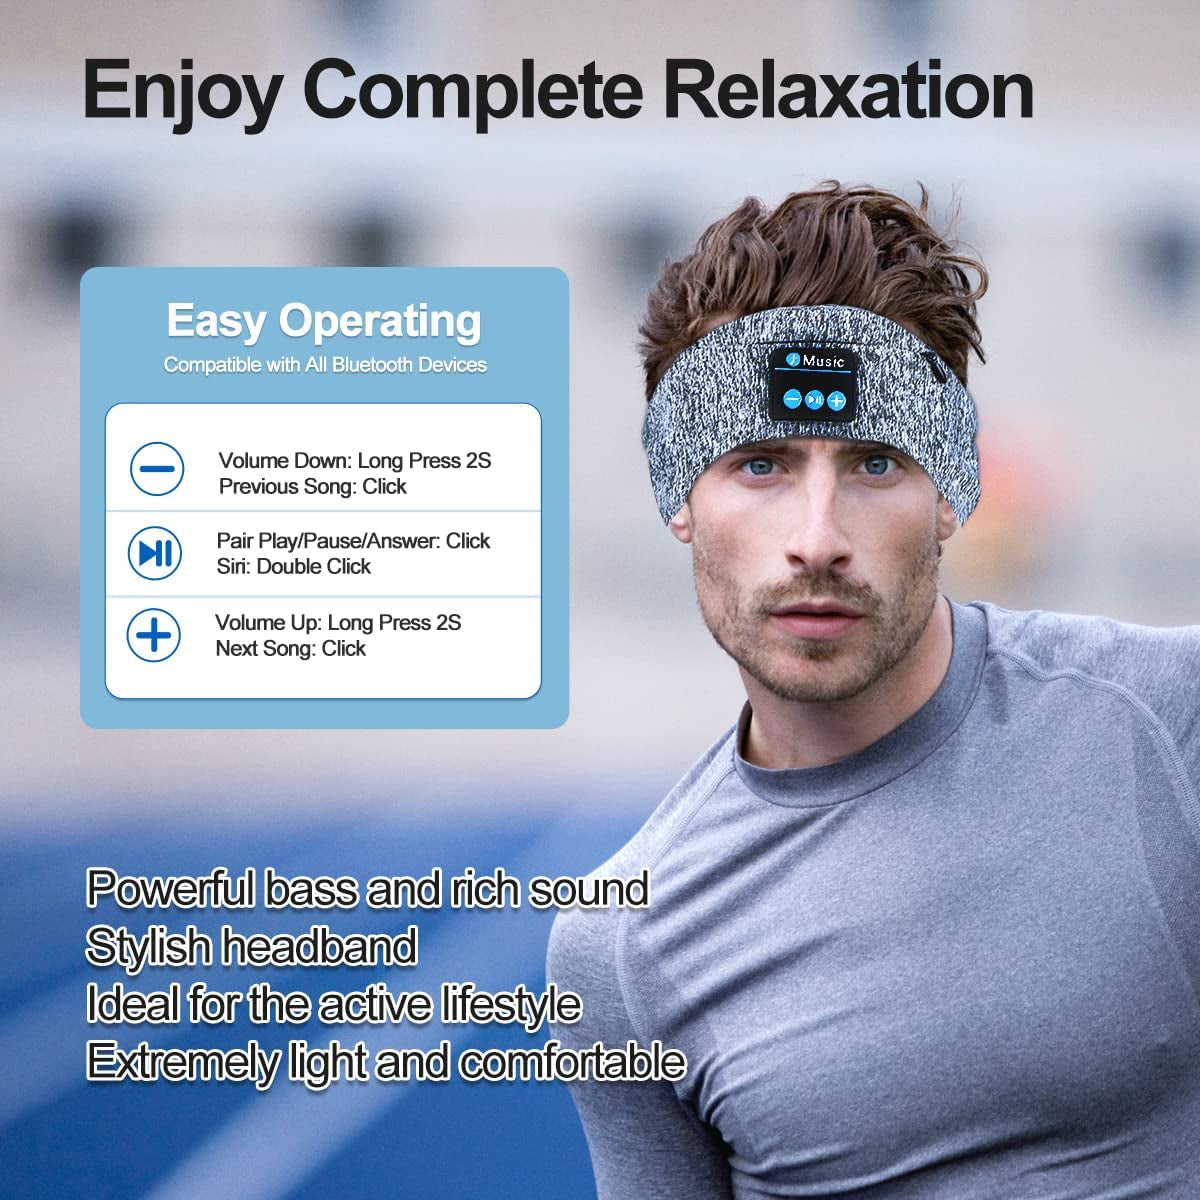 Sleep Headphones Wireless Headband Sports Earphones, Bluetooth Music Earbuds Soft Sleeping Mask Headsets with Ultra-Thin HD Stereo Speaker Perfect for Workout/Yoga/Running/Air Travel/Meditation